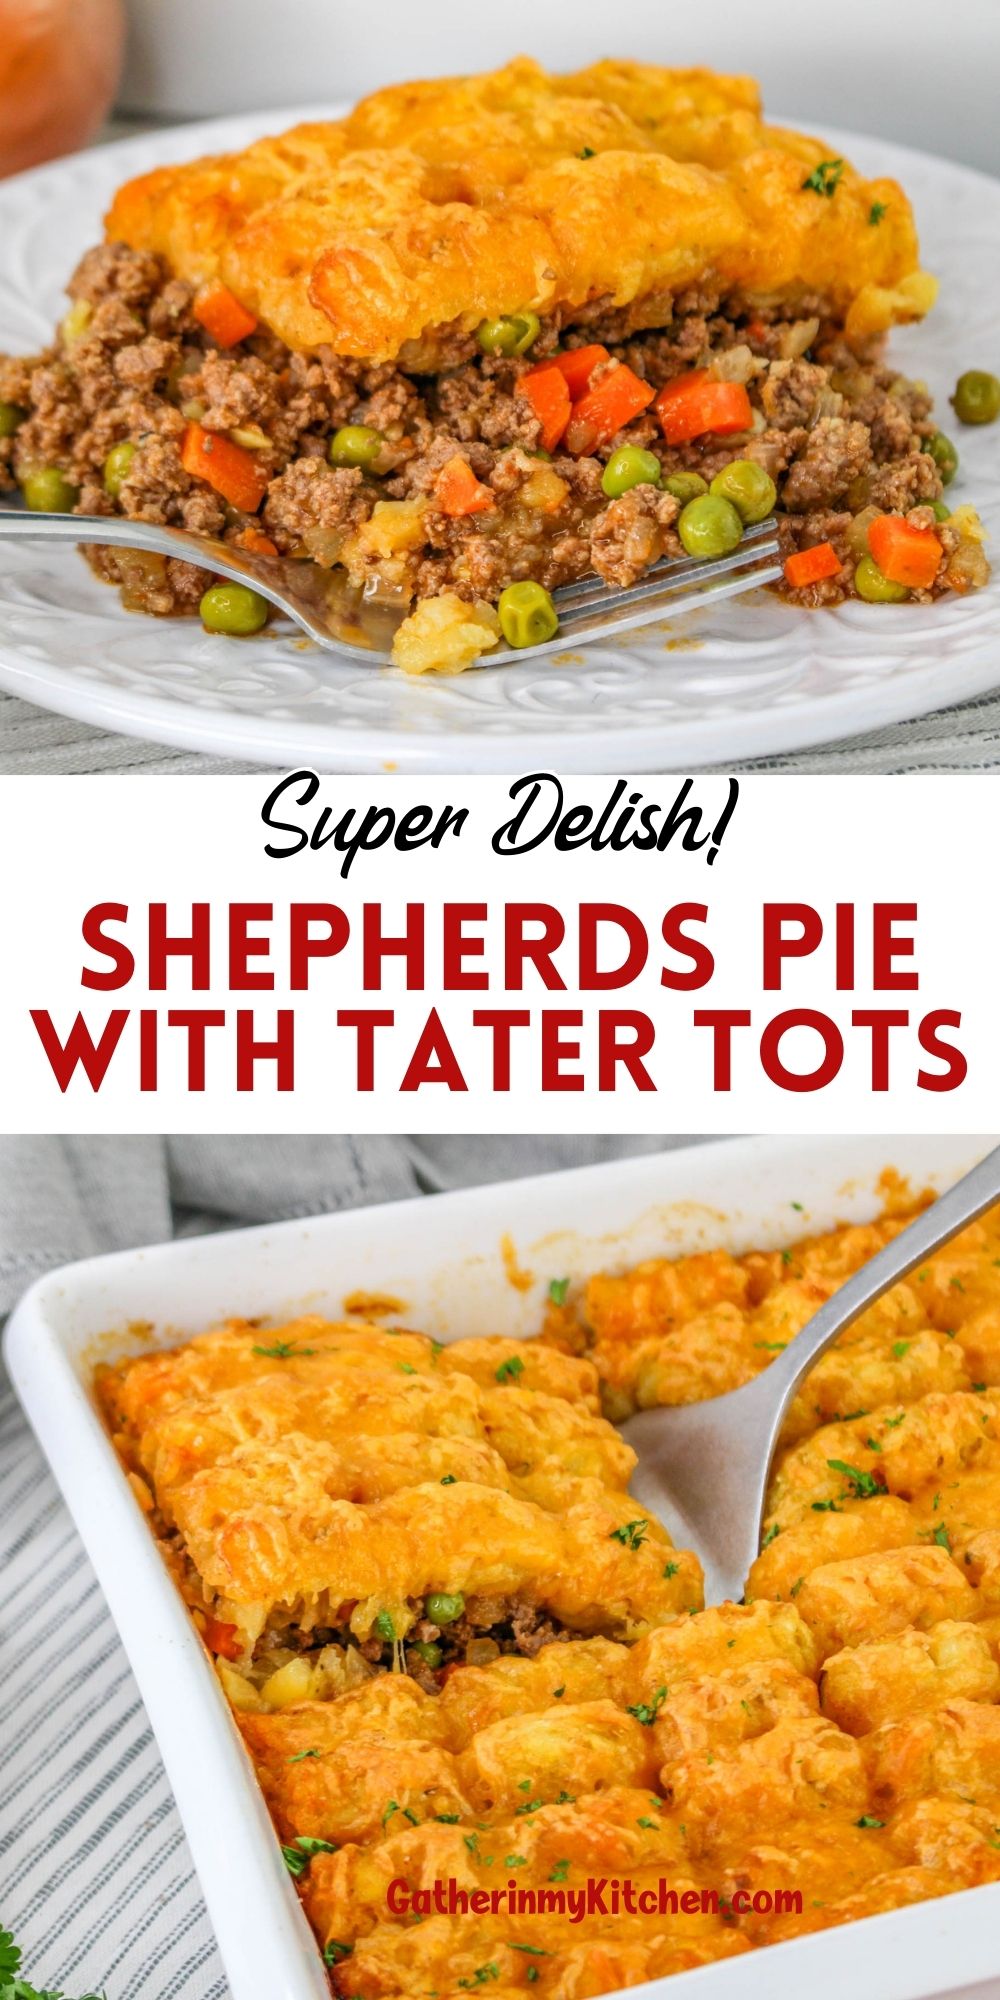 Pin image: top and bottom pics of shepherds pie with tater tots., middle says "Super Delish! Shepherds Pie with tater tots.